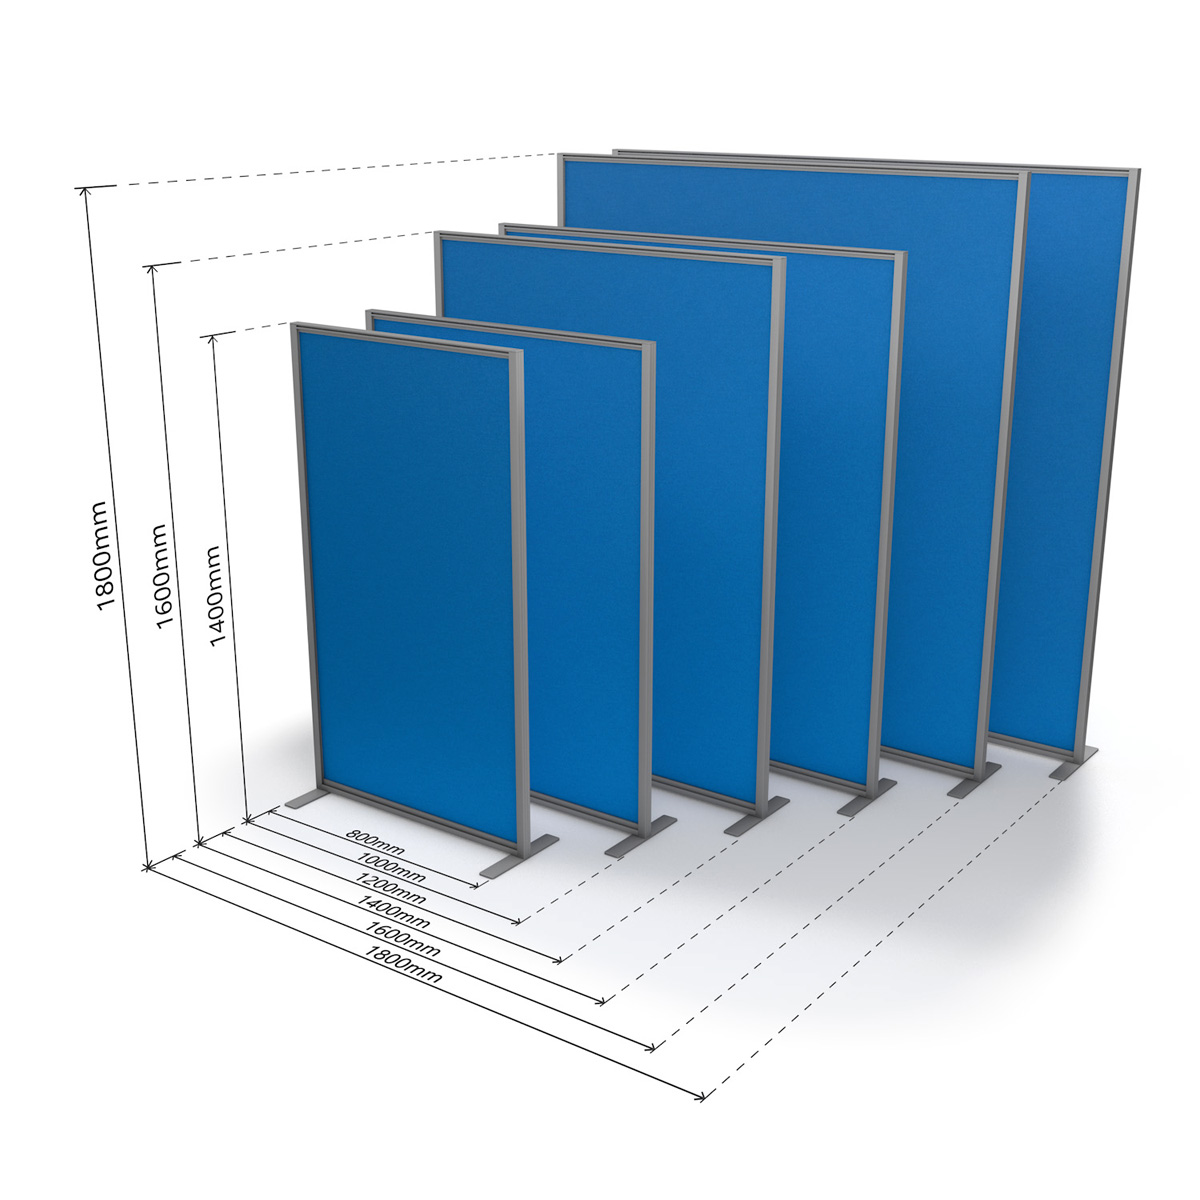 Dimensions of FRONTIER® Free Standing Office Partition Range